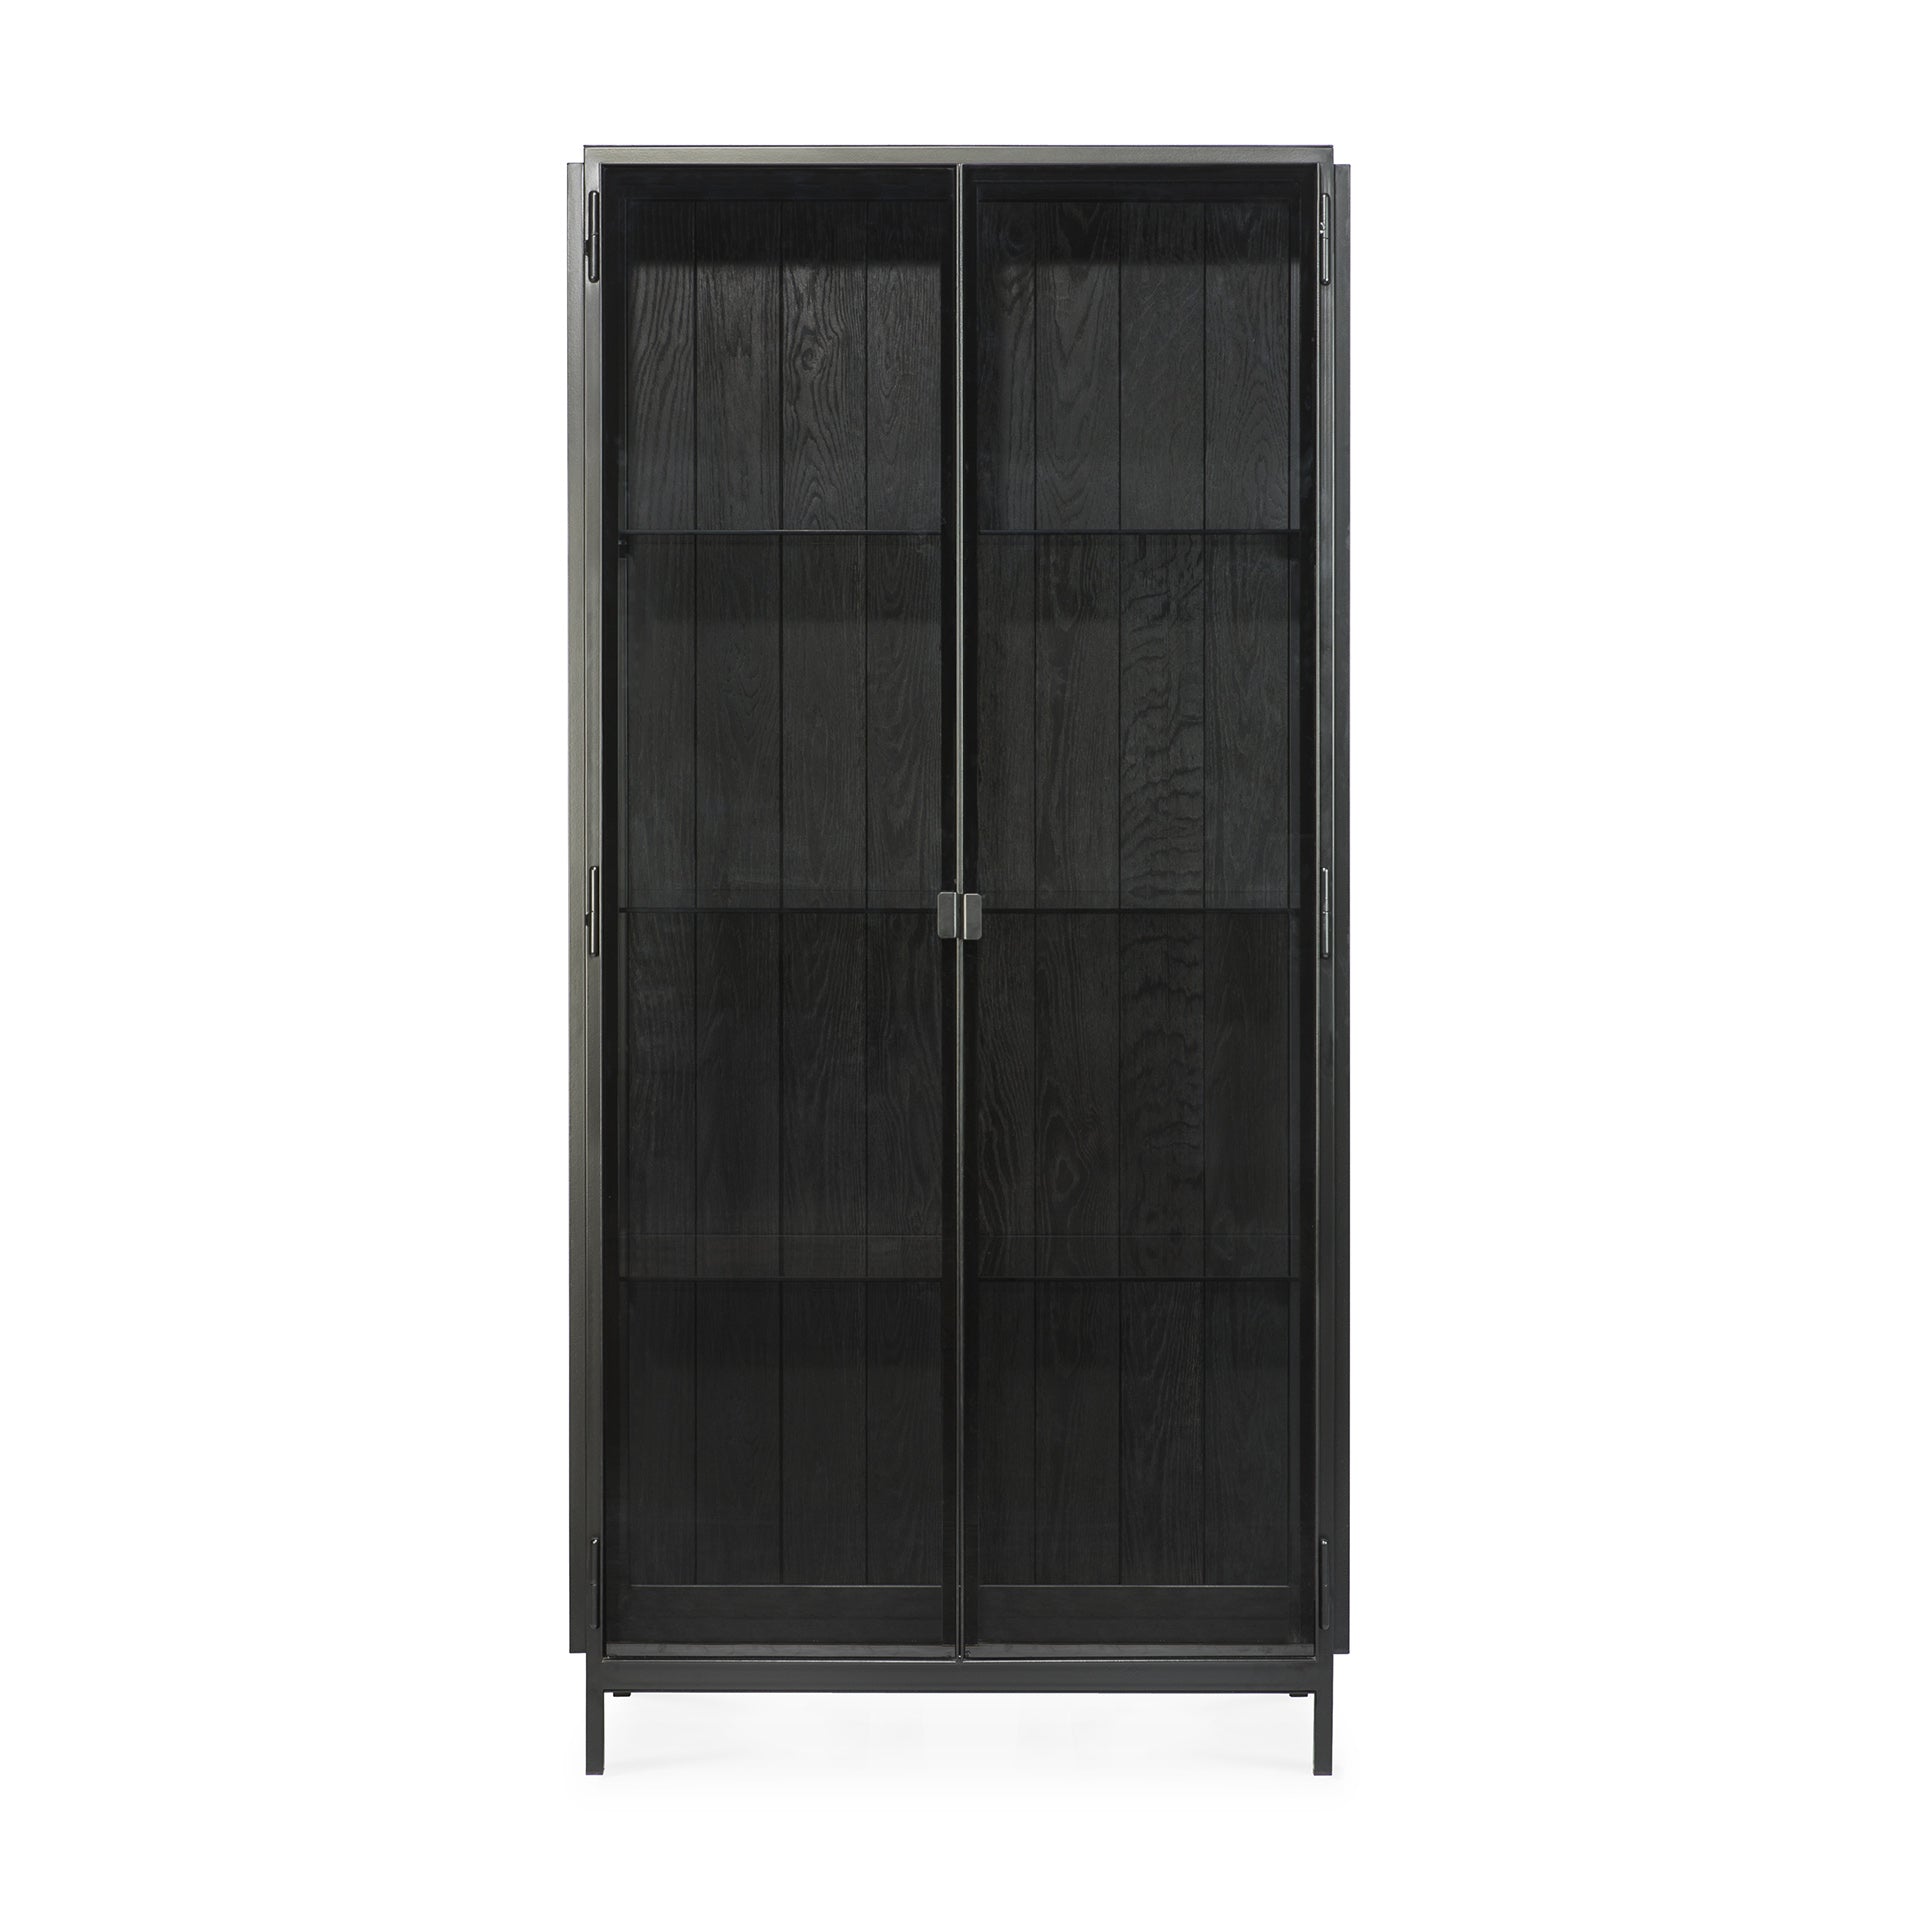 Ethnicraft Anders Storage Display Cabinet available from Make Your House A Home, Bendigo, Victoria, Australia